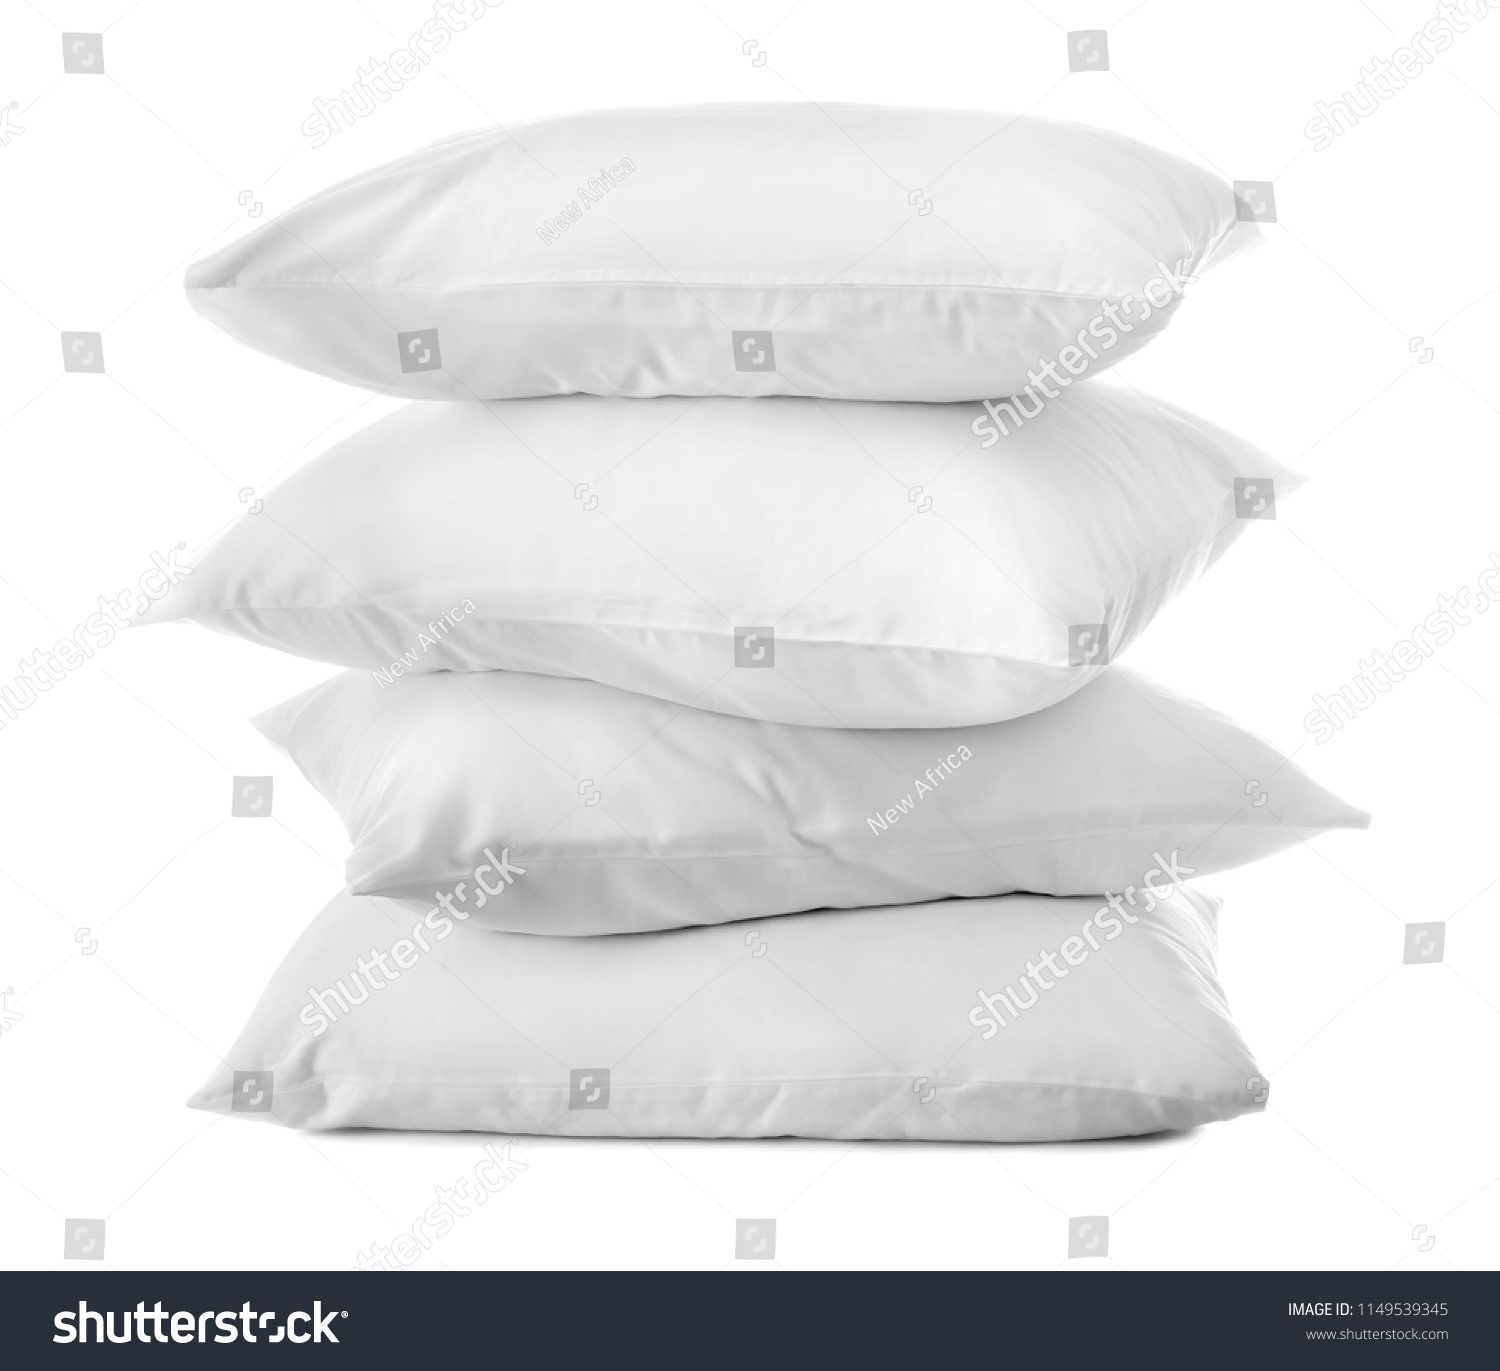 Clean soft bed pillows on white background #1149539345